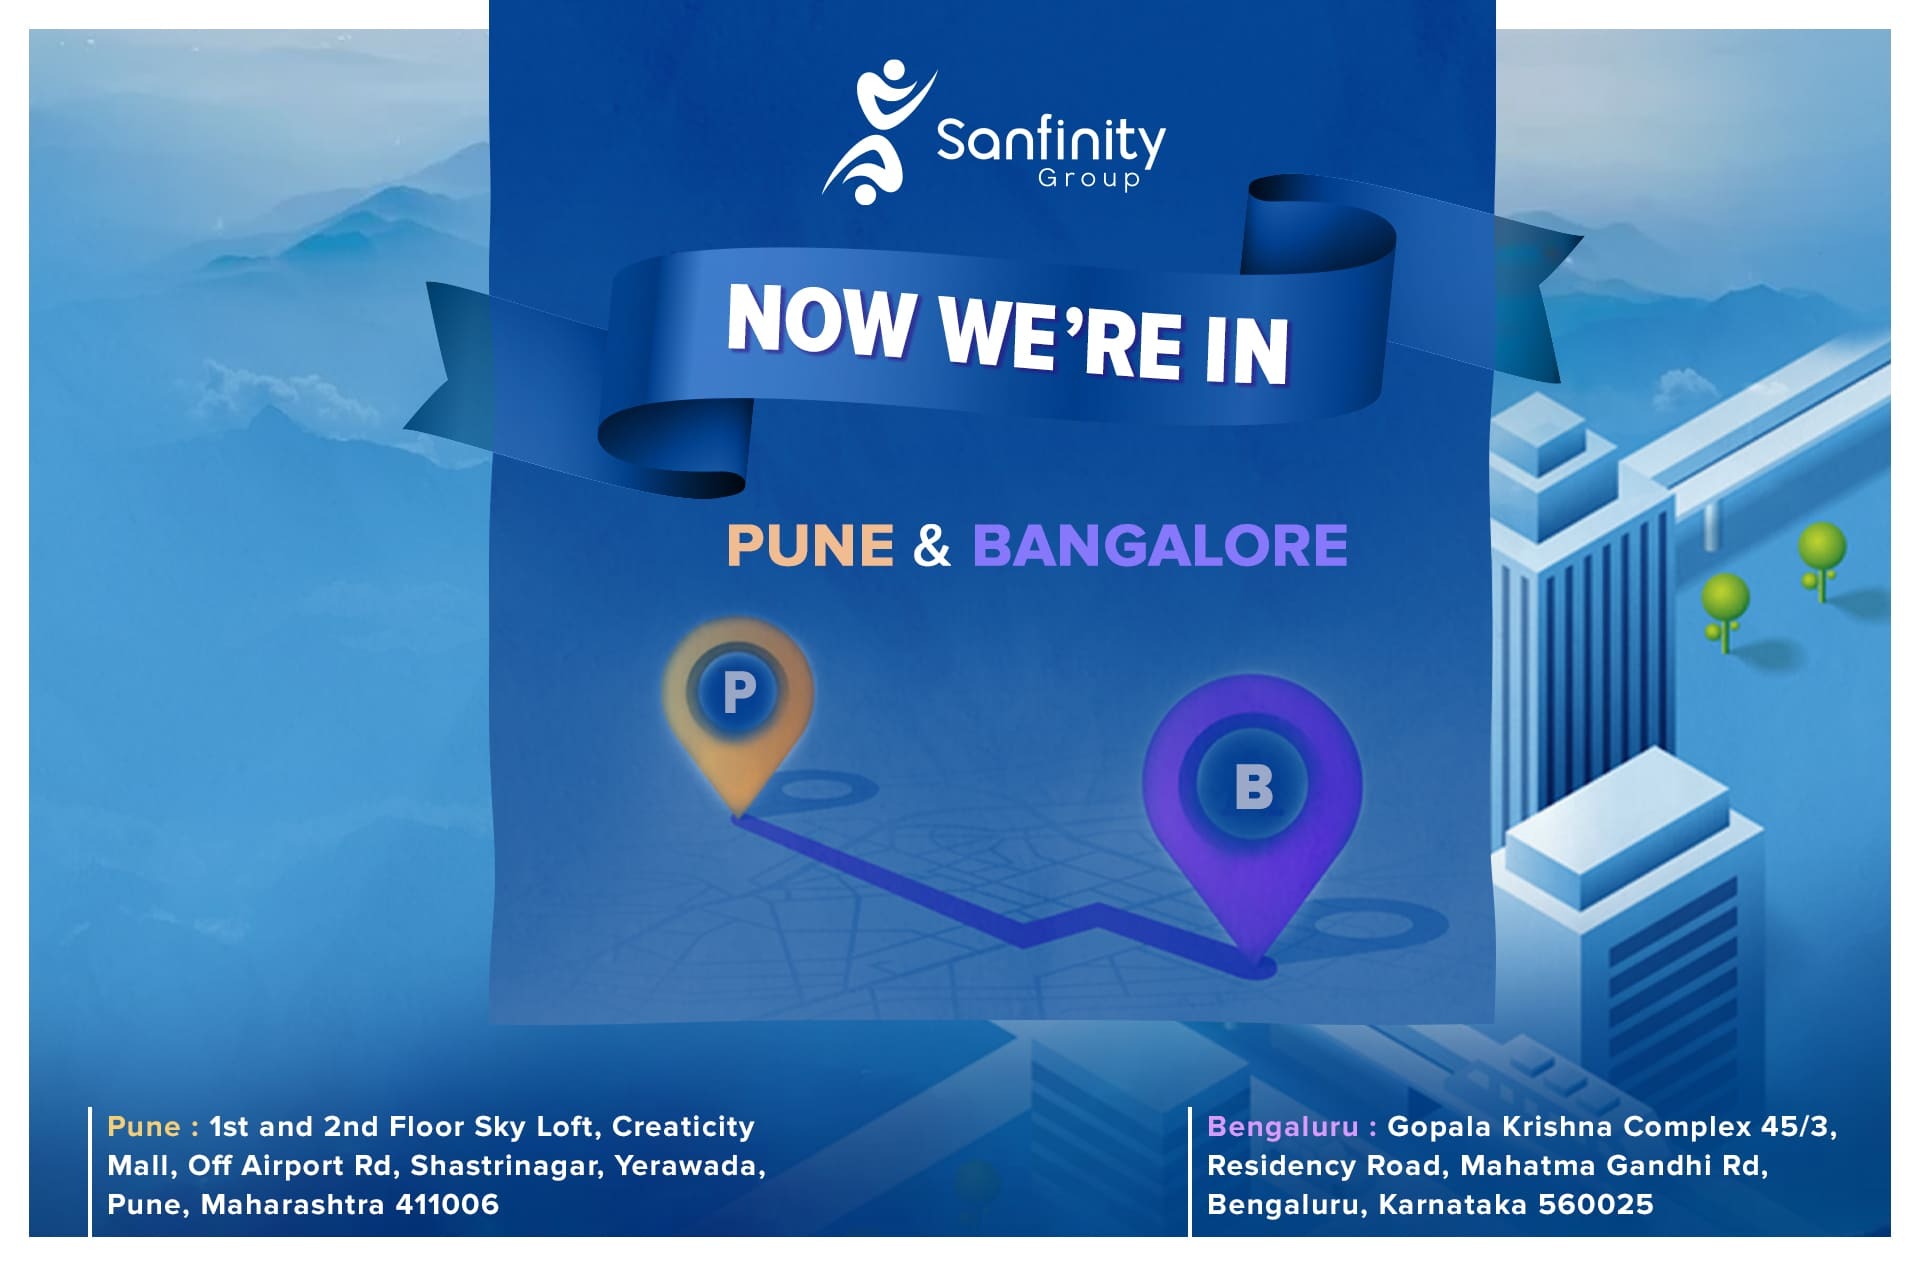 now we are in pune & bangalore